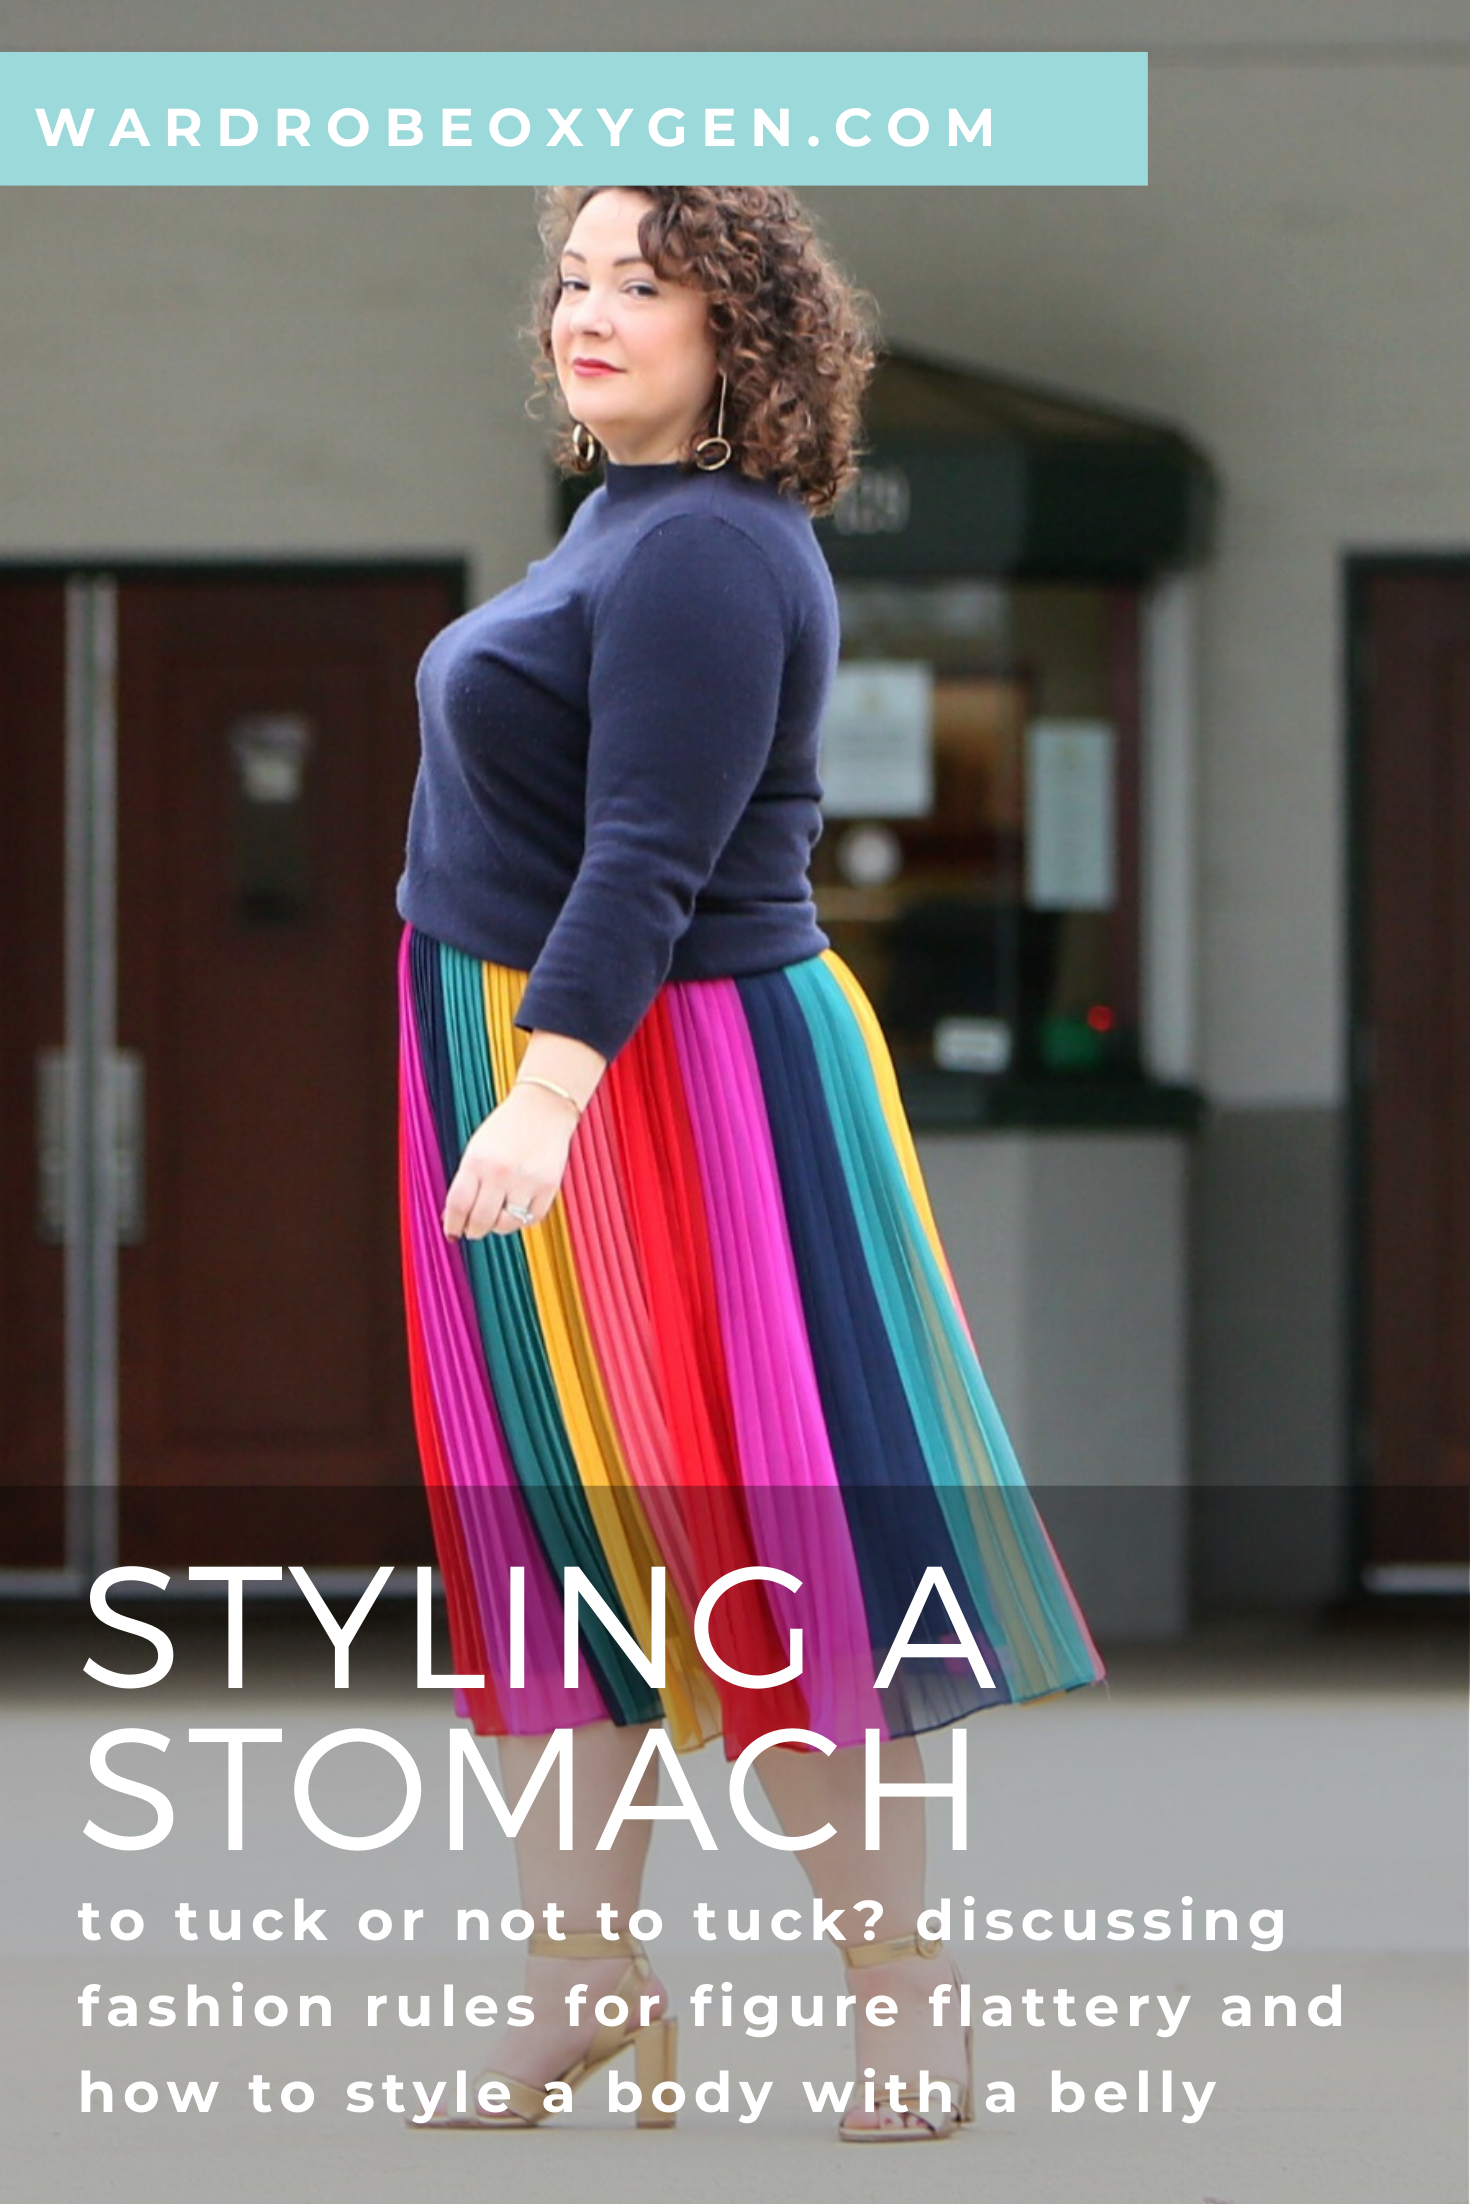 Styling a Stomach: To Tuck or Not to Tuck?